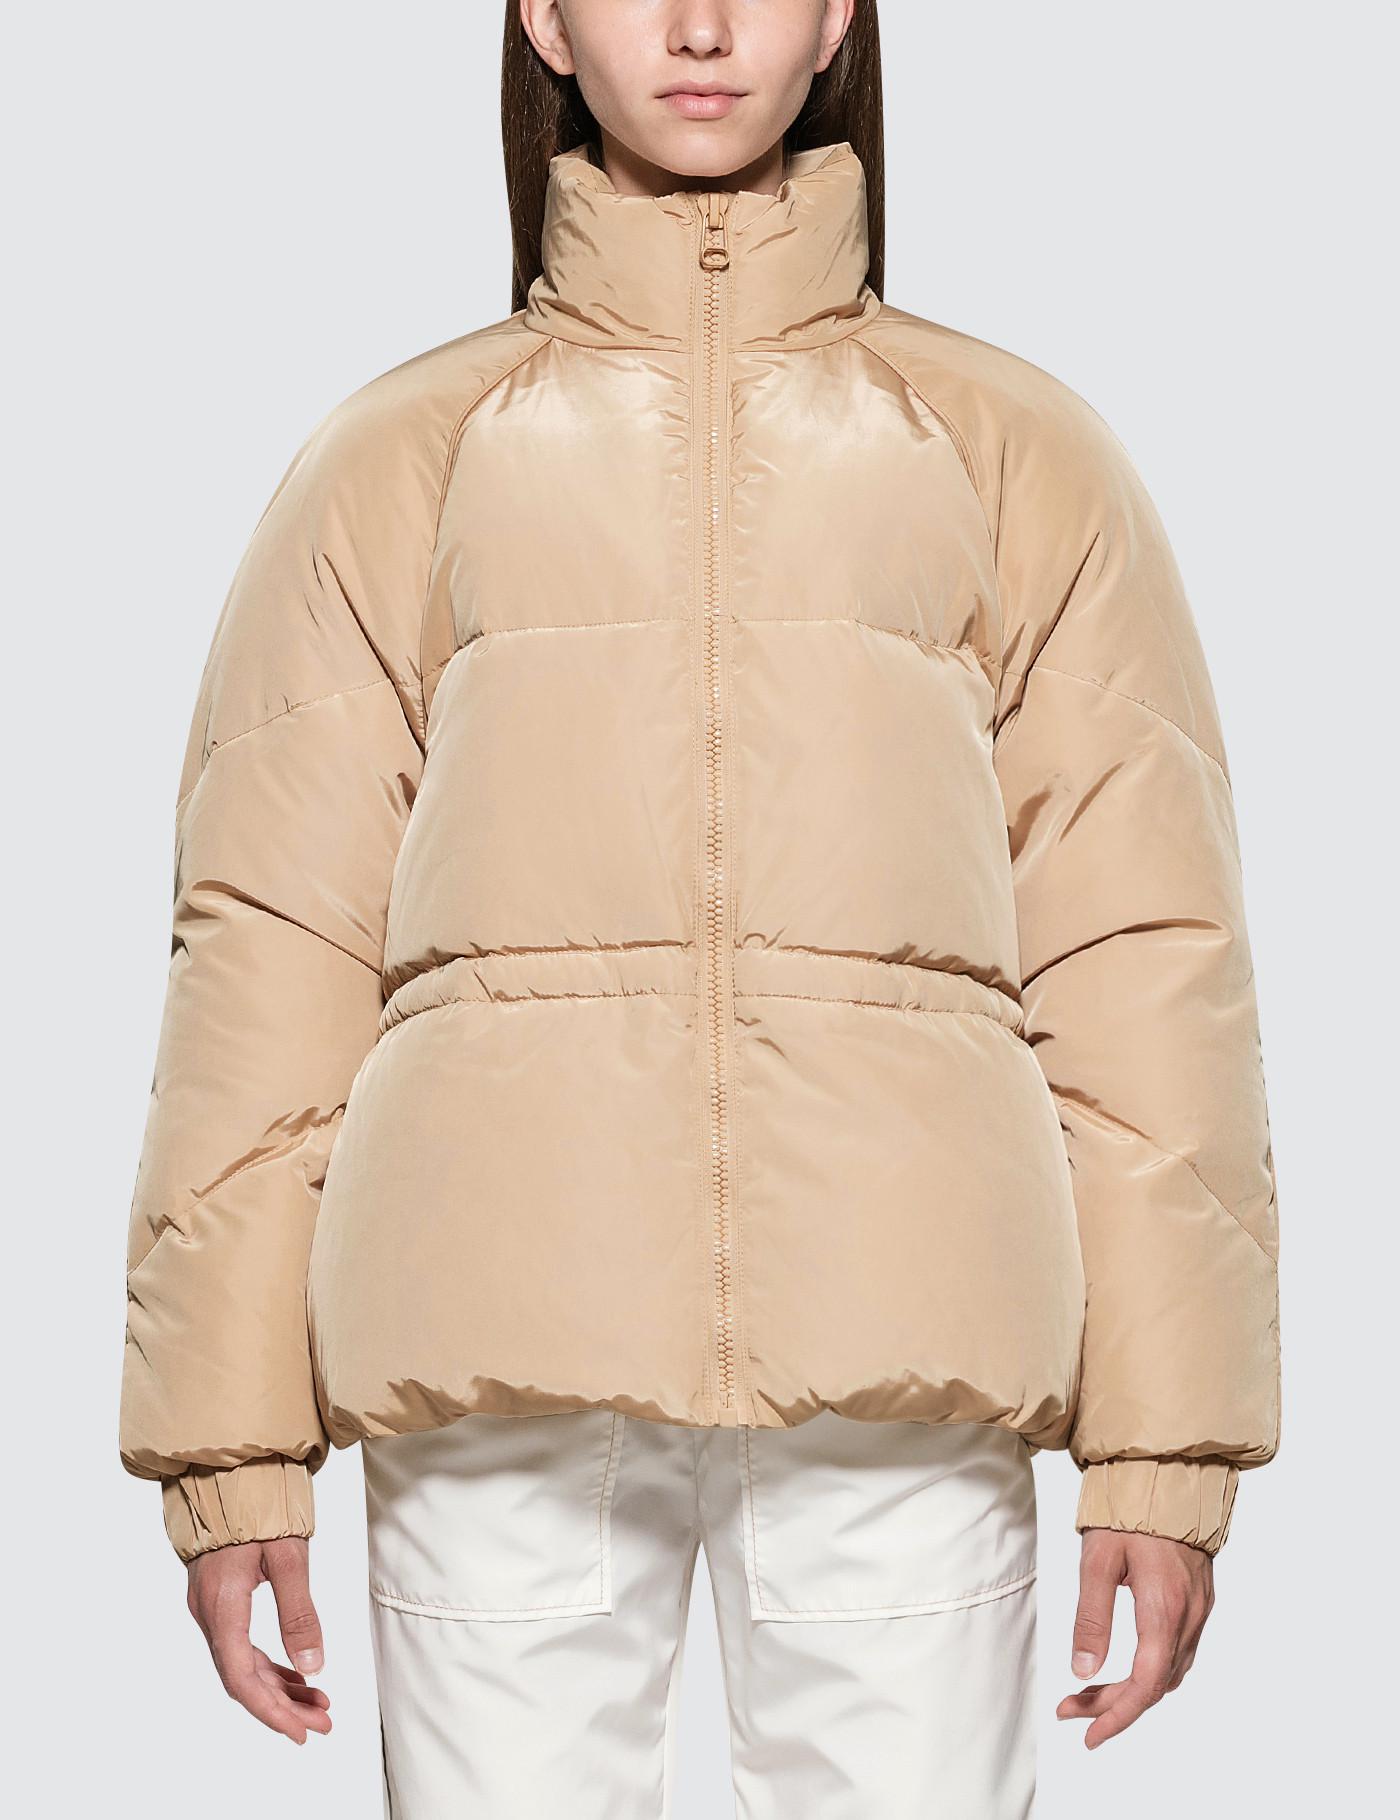 Ganni Synthetic Whitman Down Puffer Jacket in Beige (Natural) - Lyst